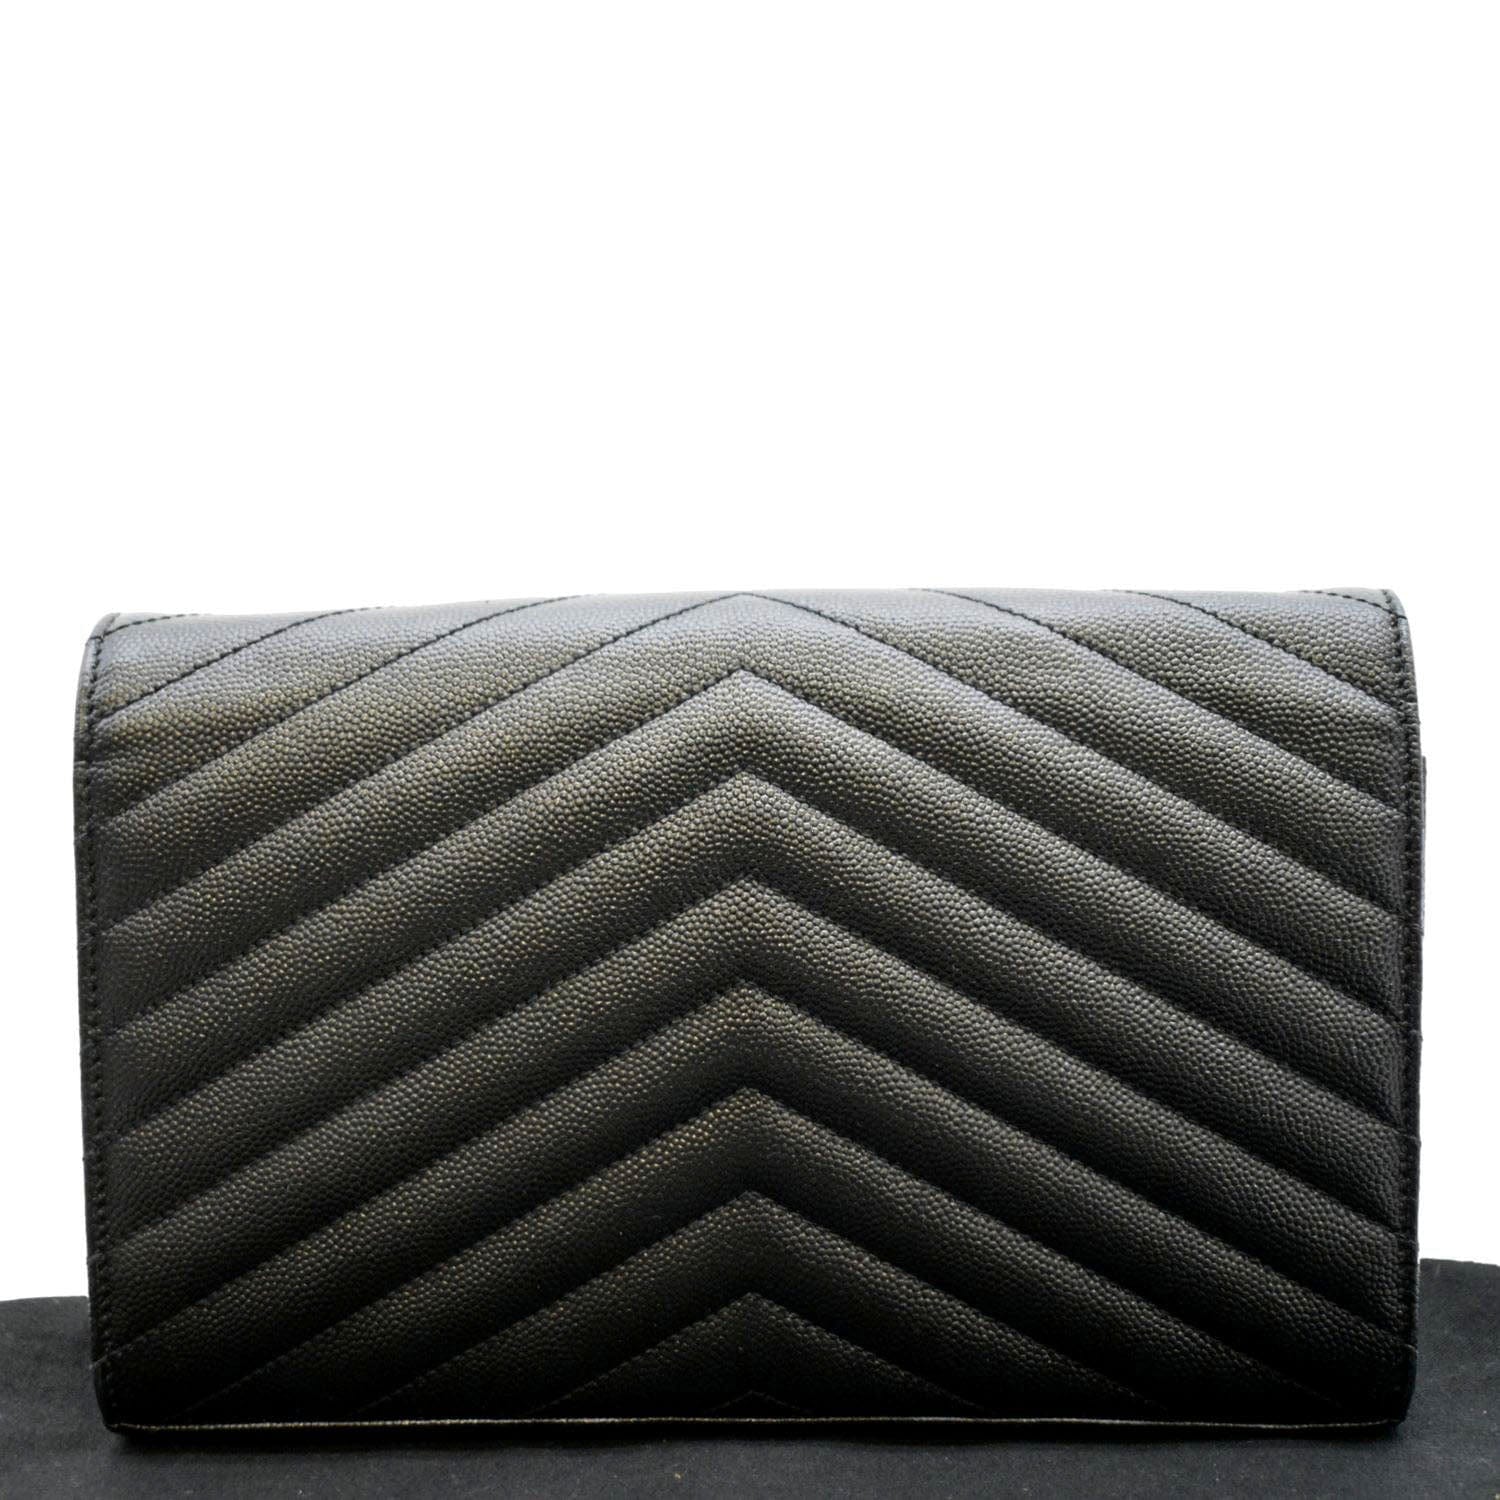 Ysl Chevron Quilted Leather Wallet on Chain